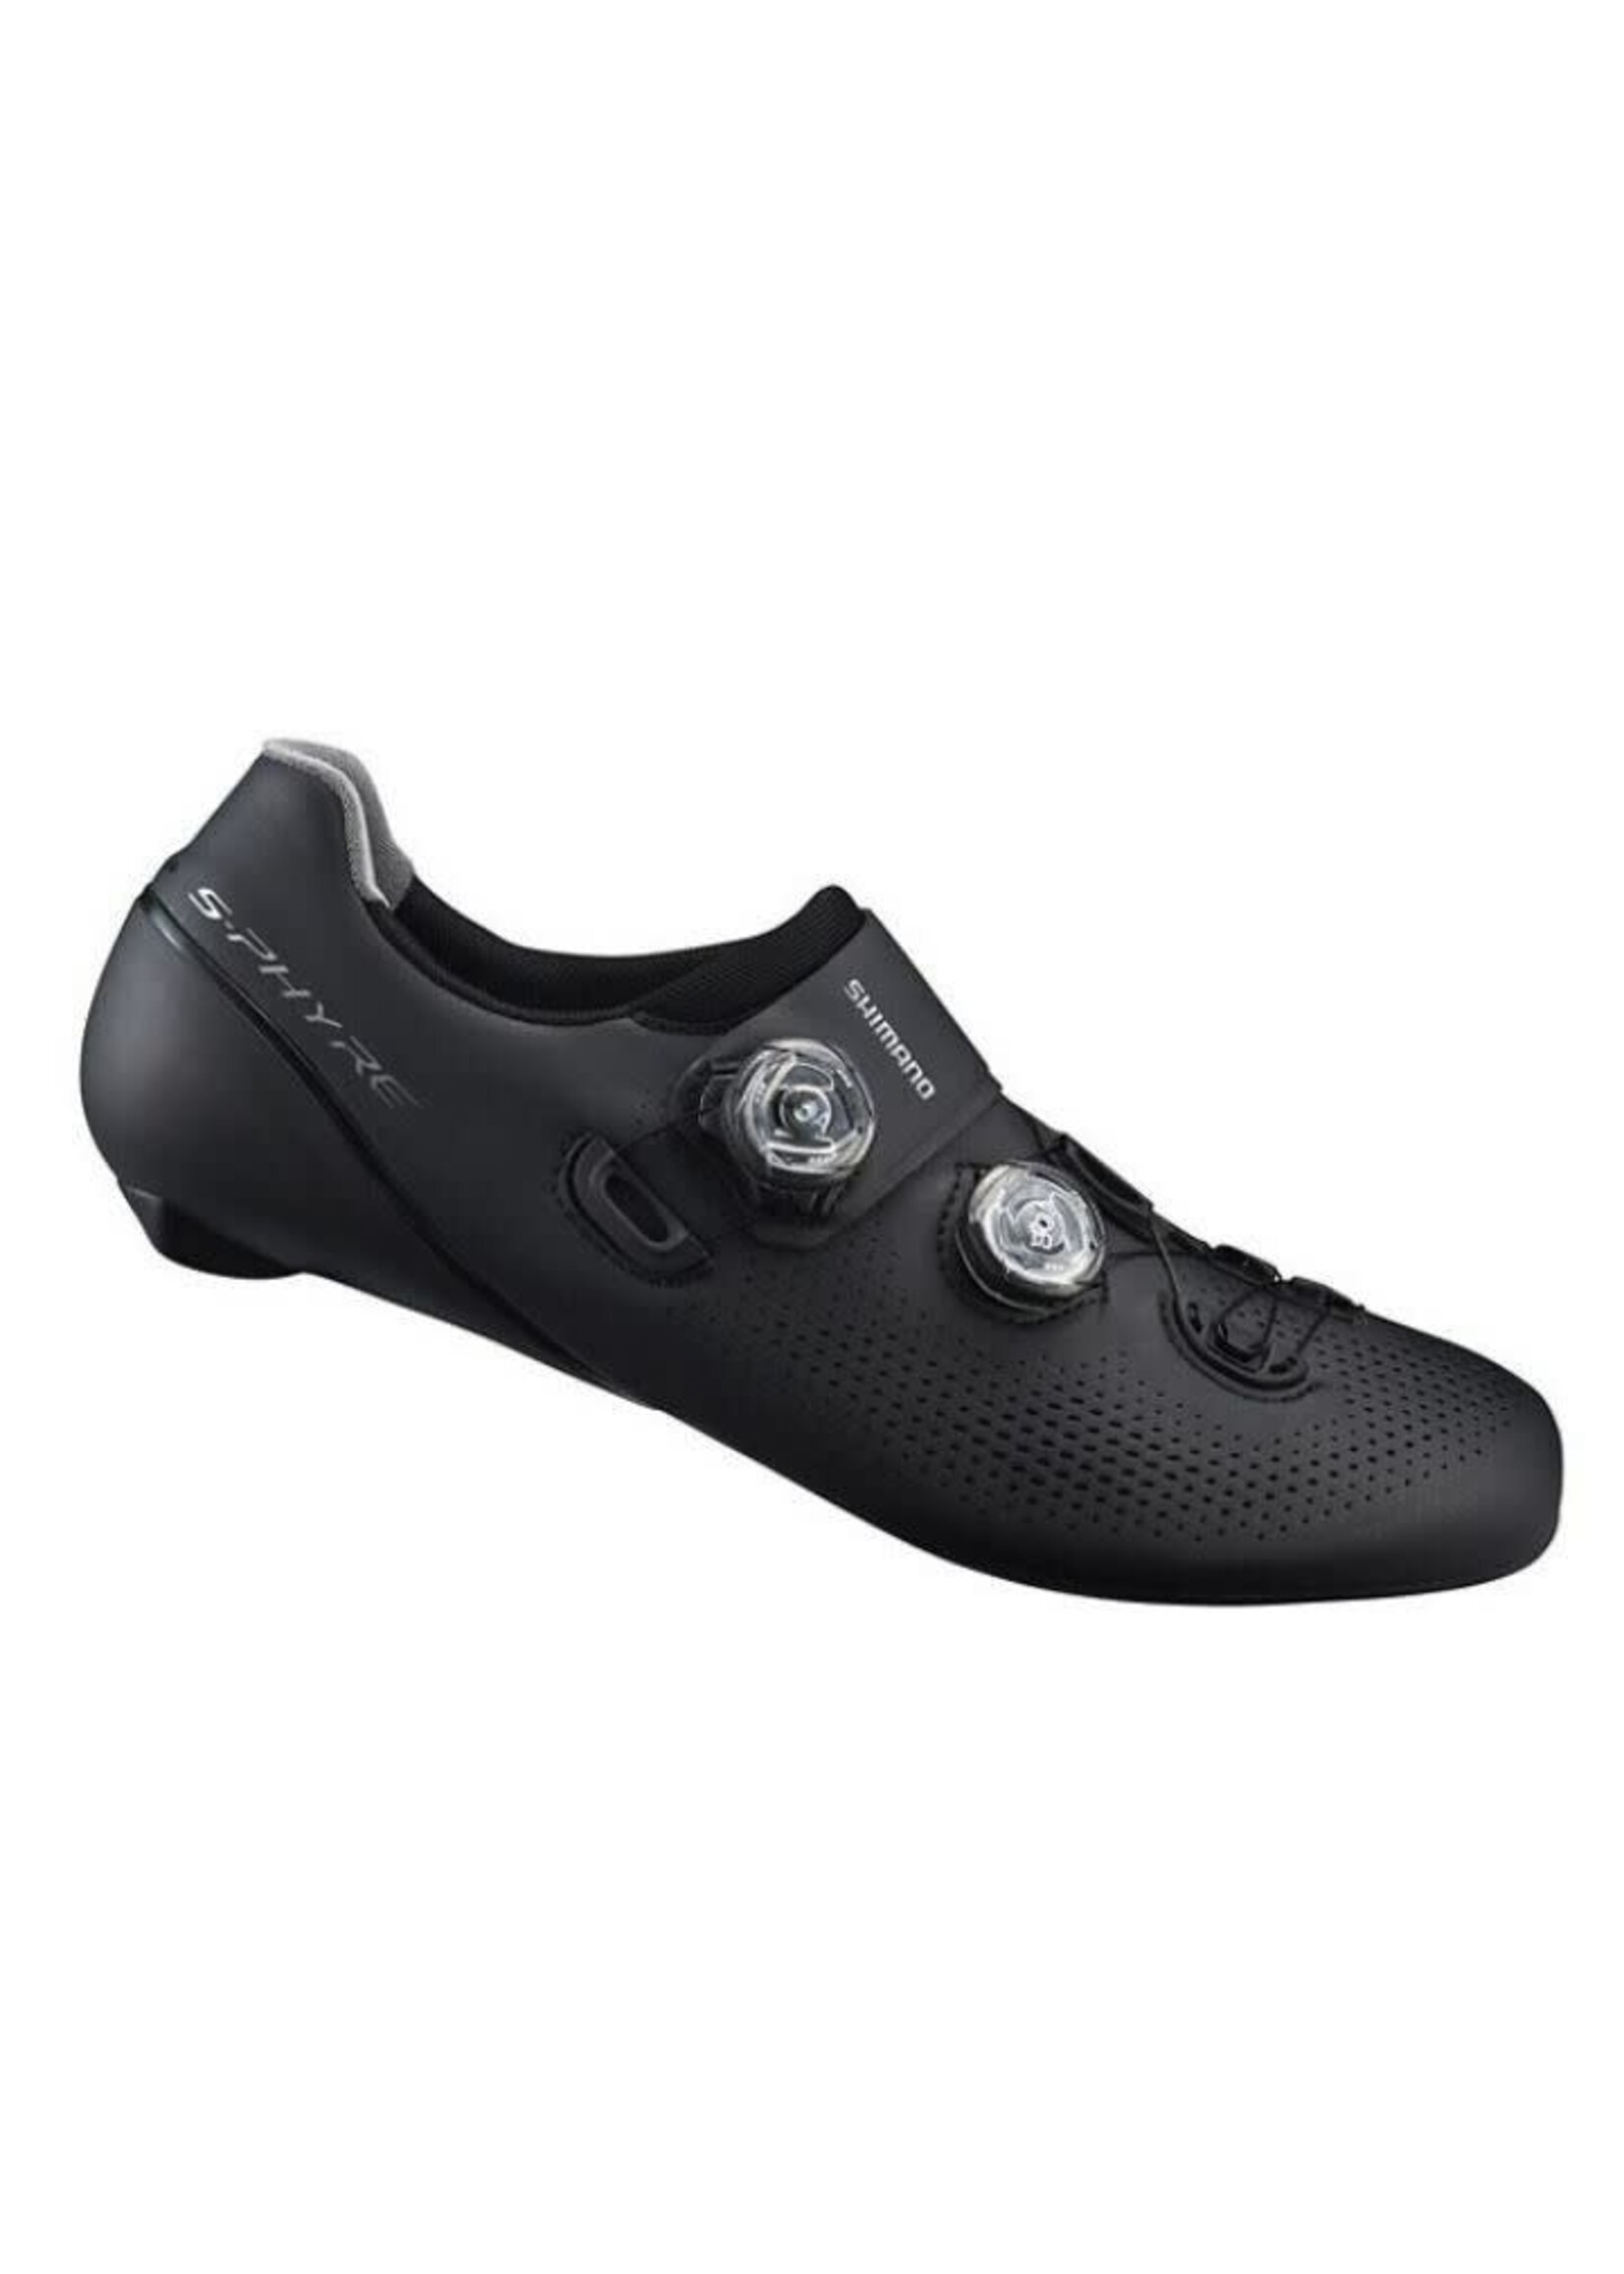 Shimano SH-RC901 S-PHYRE BICYCLE SHOES BLACK 42.0